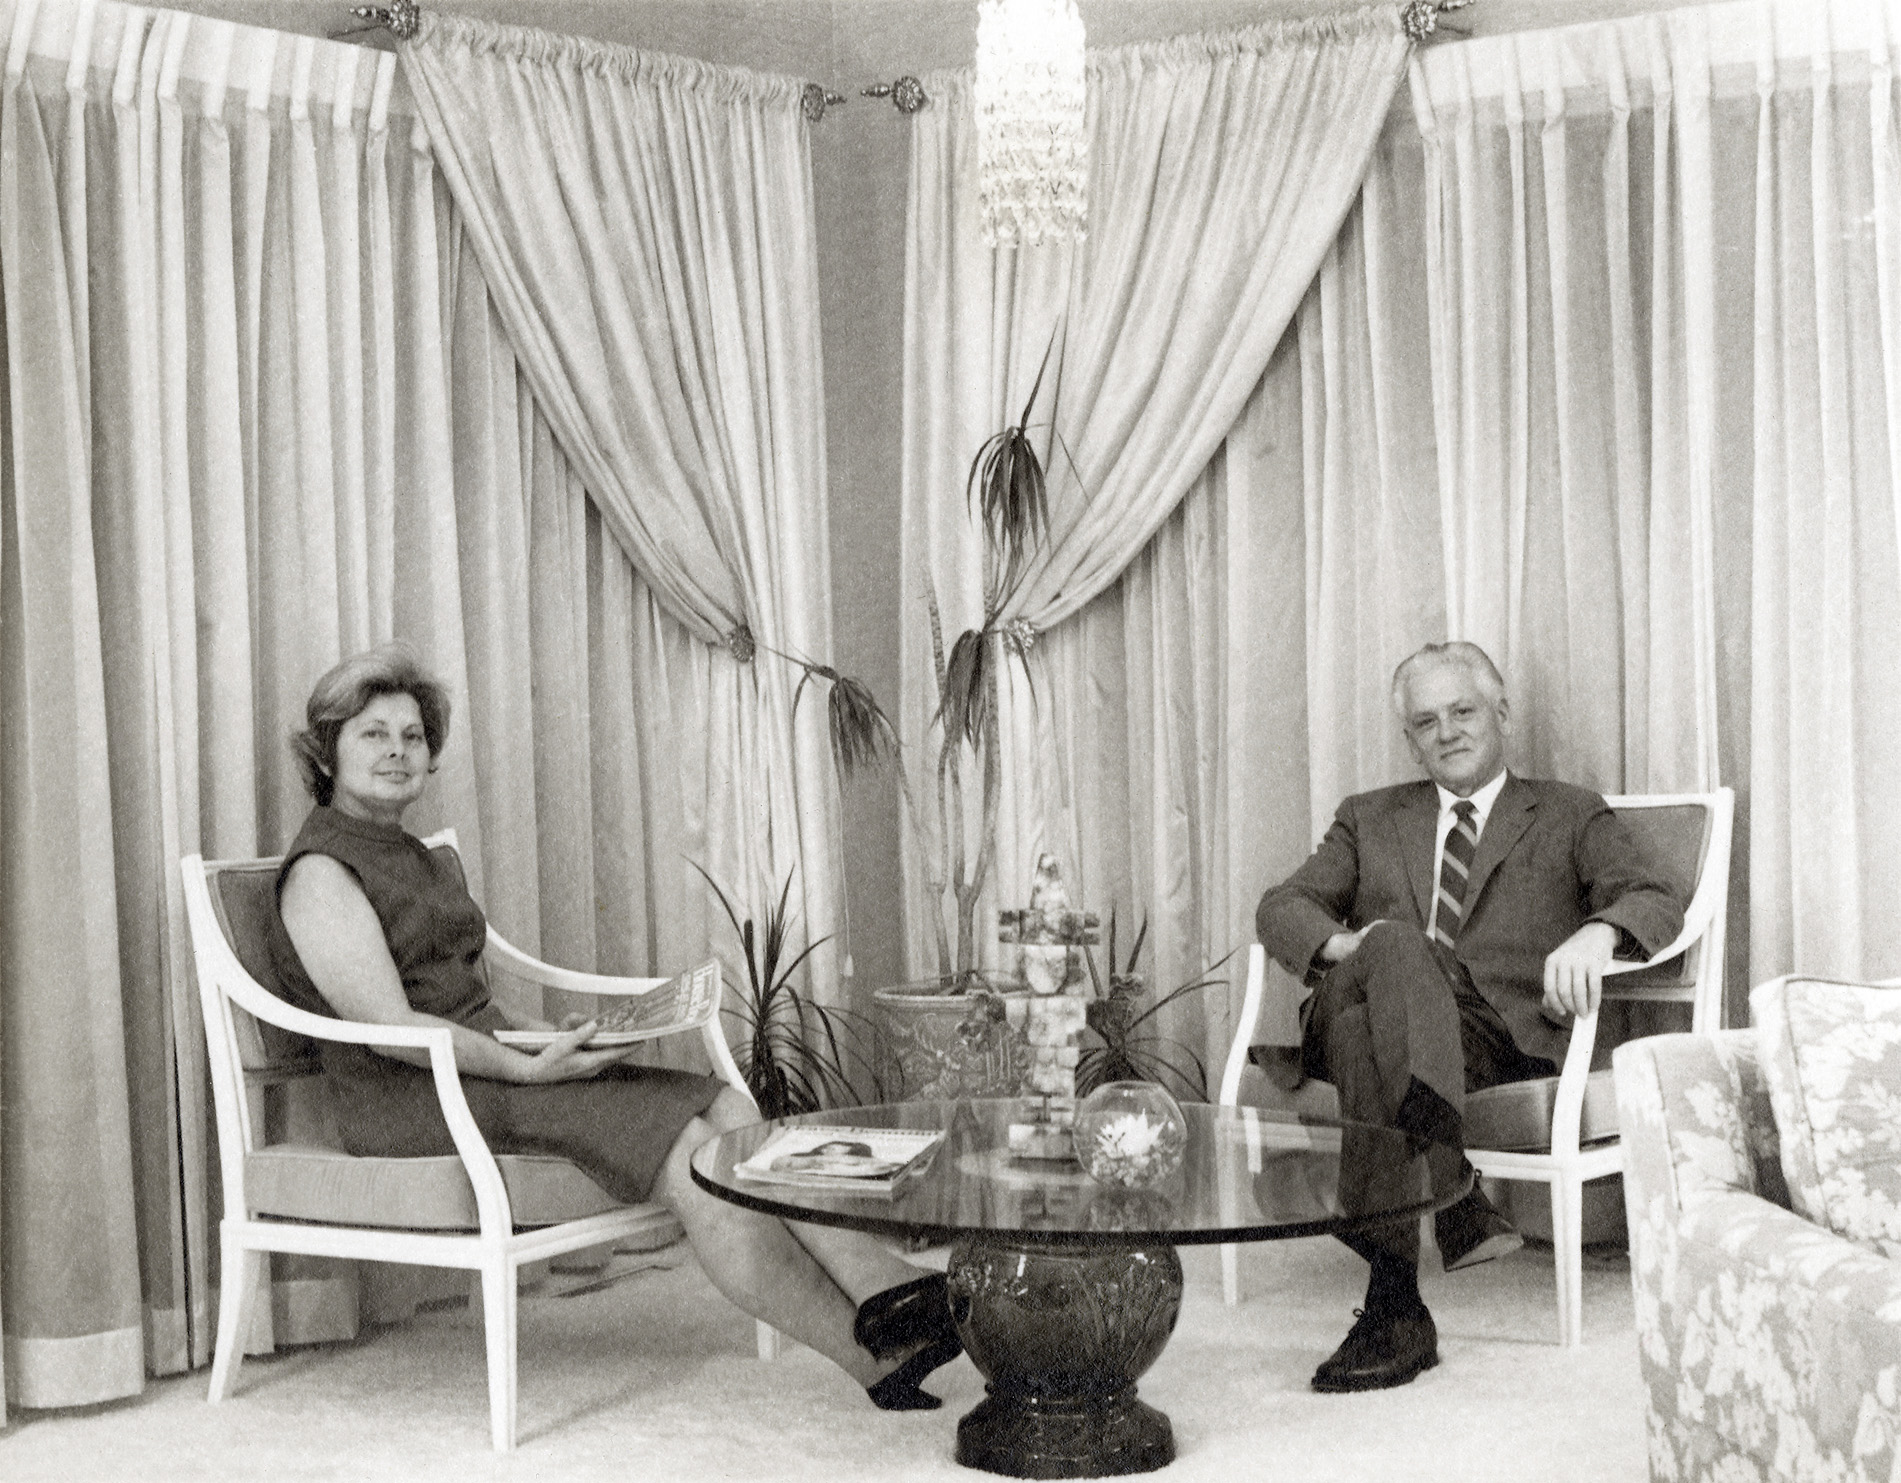 1967. Susie and Oliver Baugher relaxing in their Waynesboro, Virginia, home. Their house was genuine mid-century modern but their style and grace were from another era. The perfect hosts, they always made you feel good about yourself (style and grace Rule 1). Susie lived to be 100. View full size.